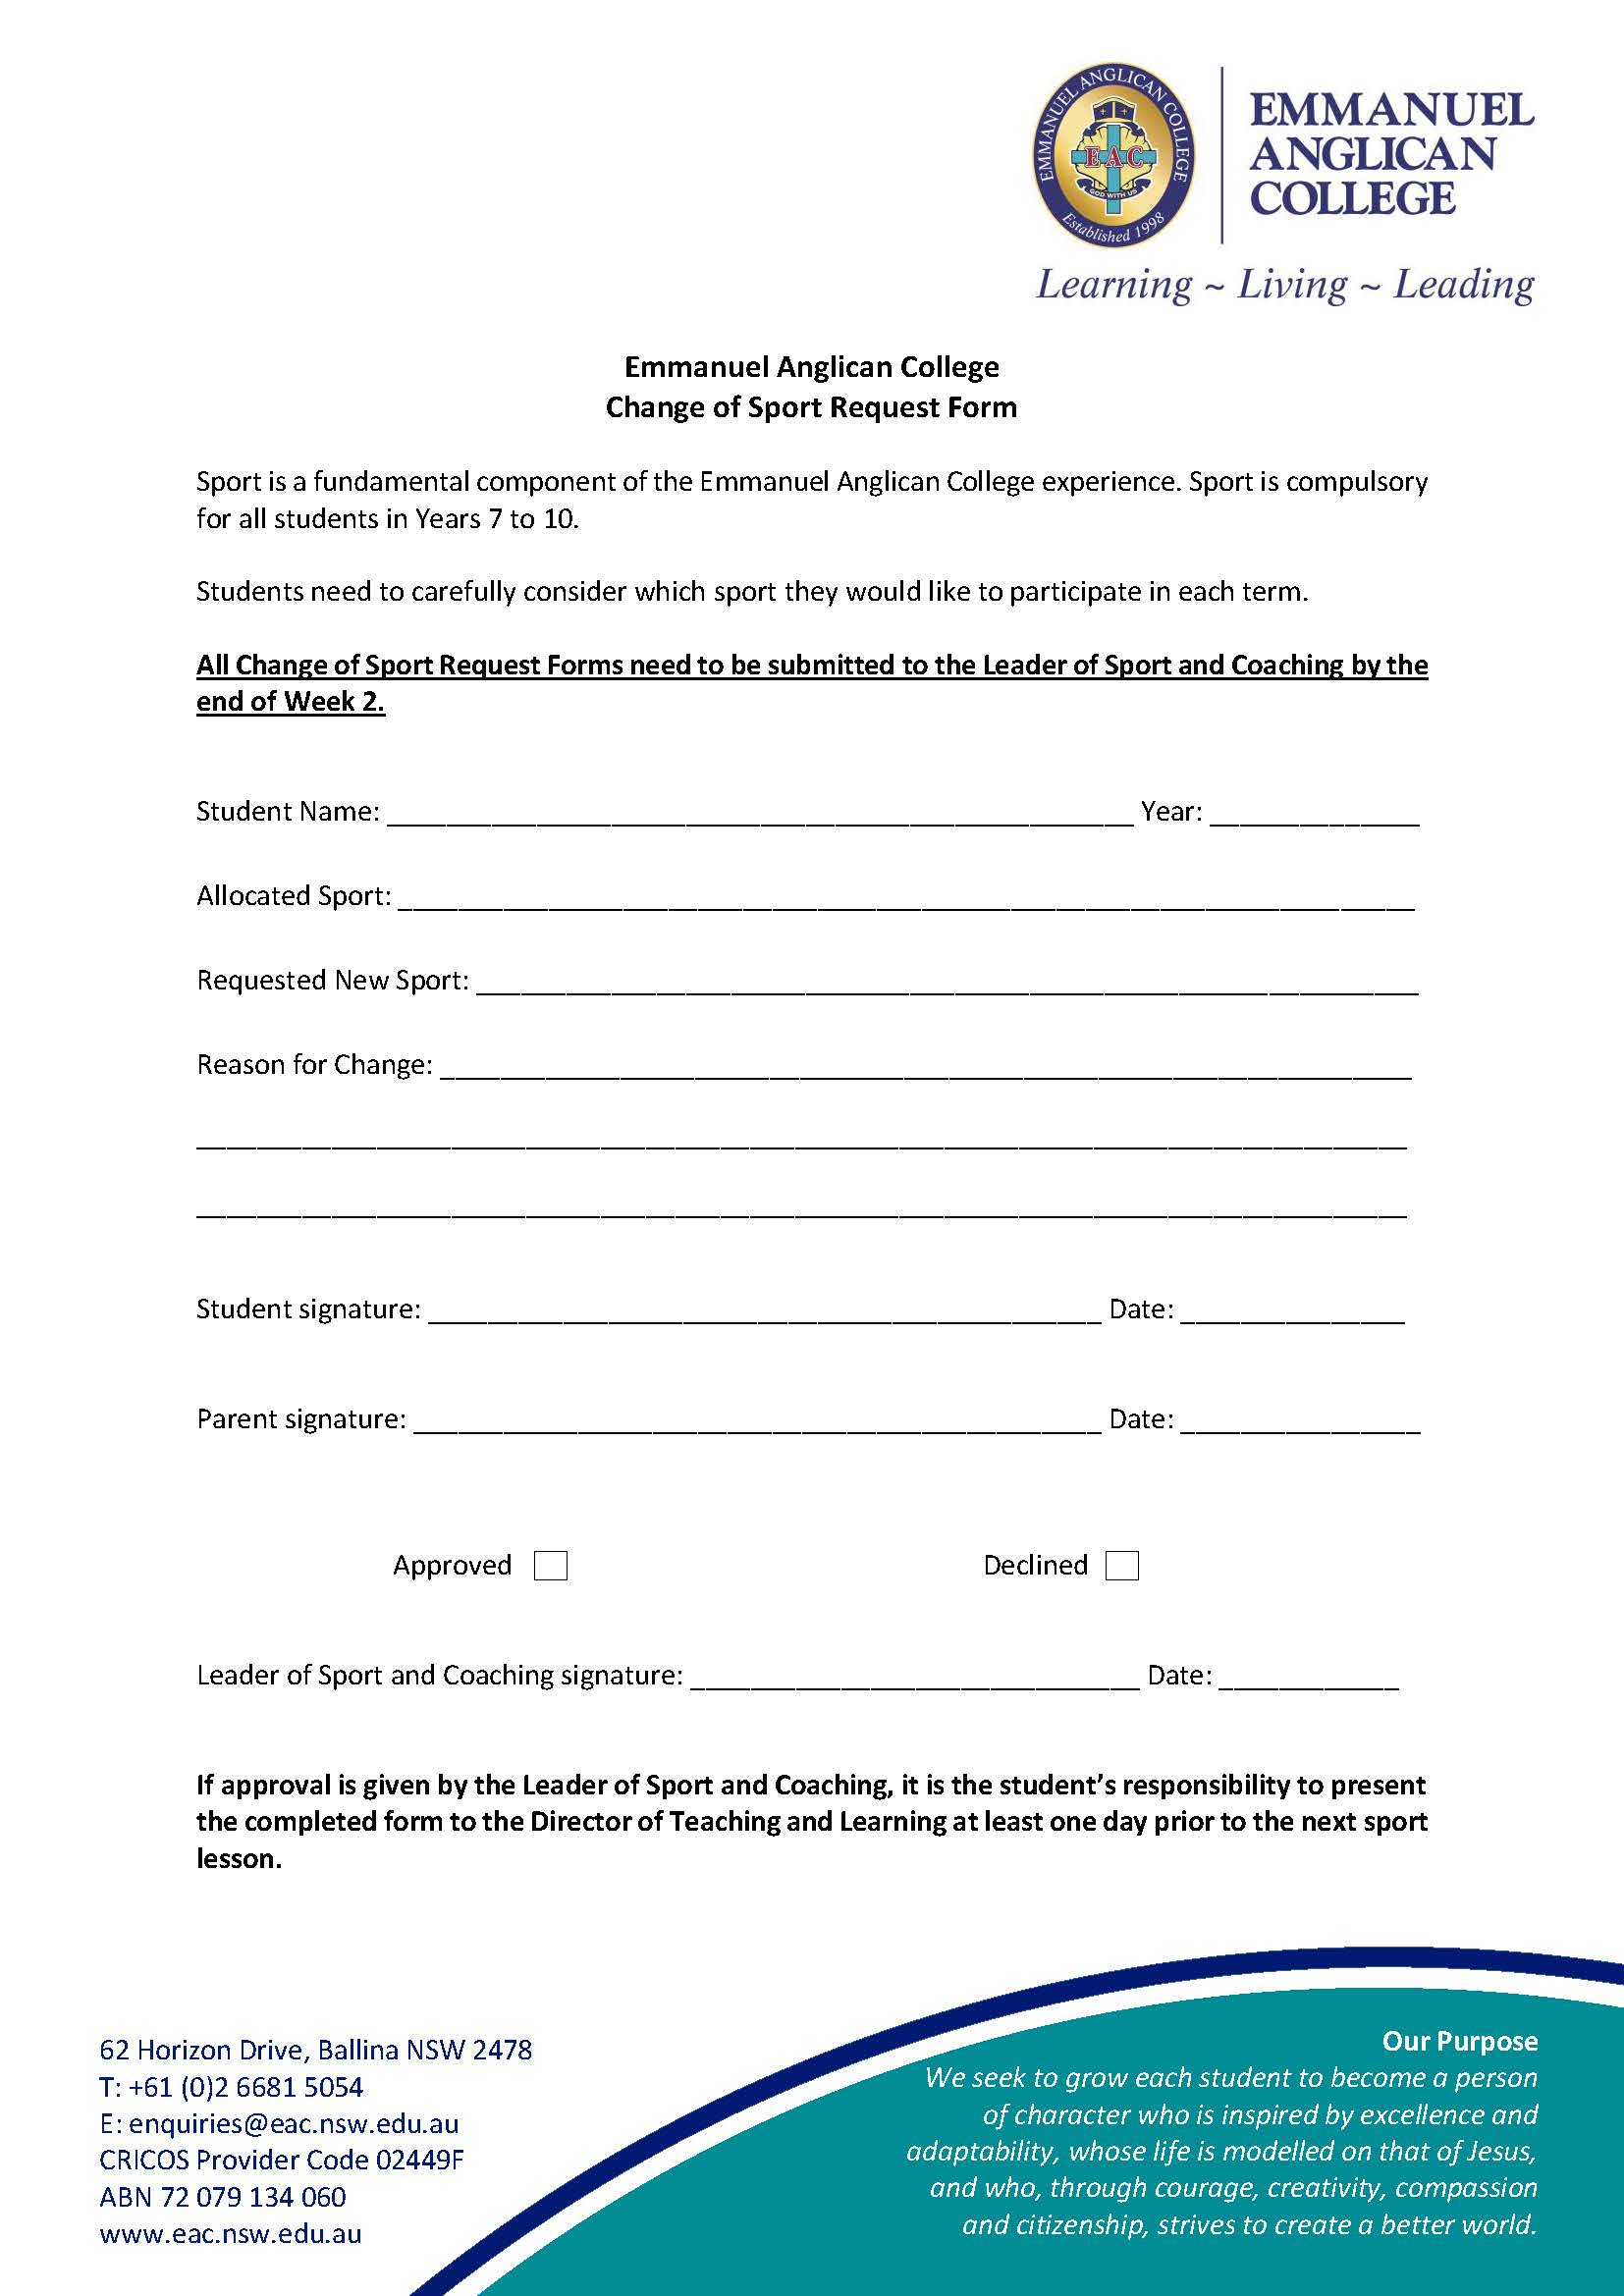 Change of Sport Request Form